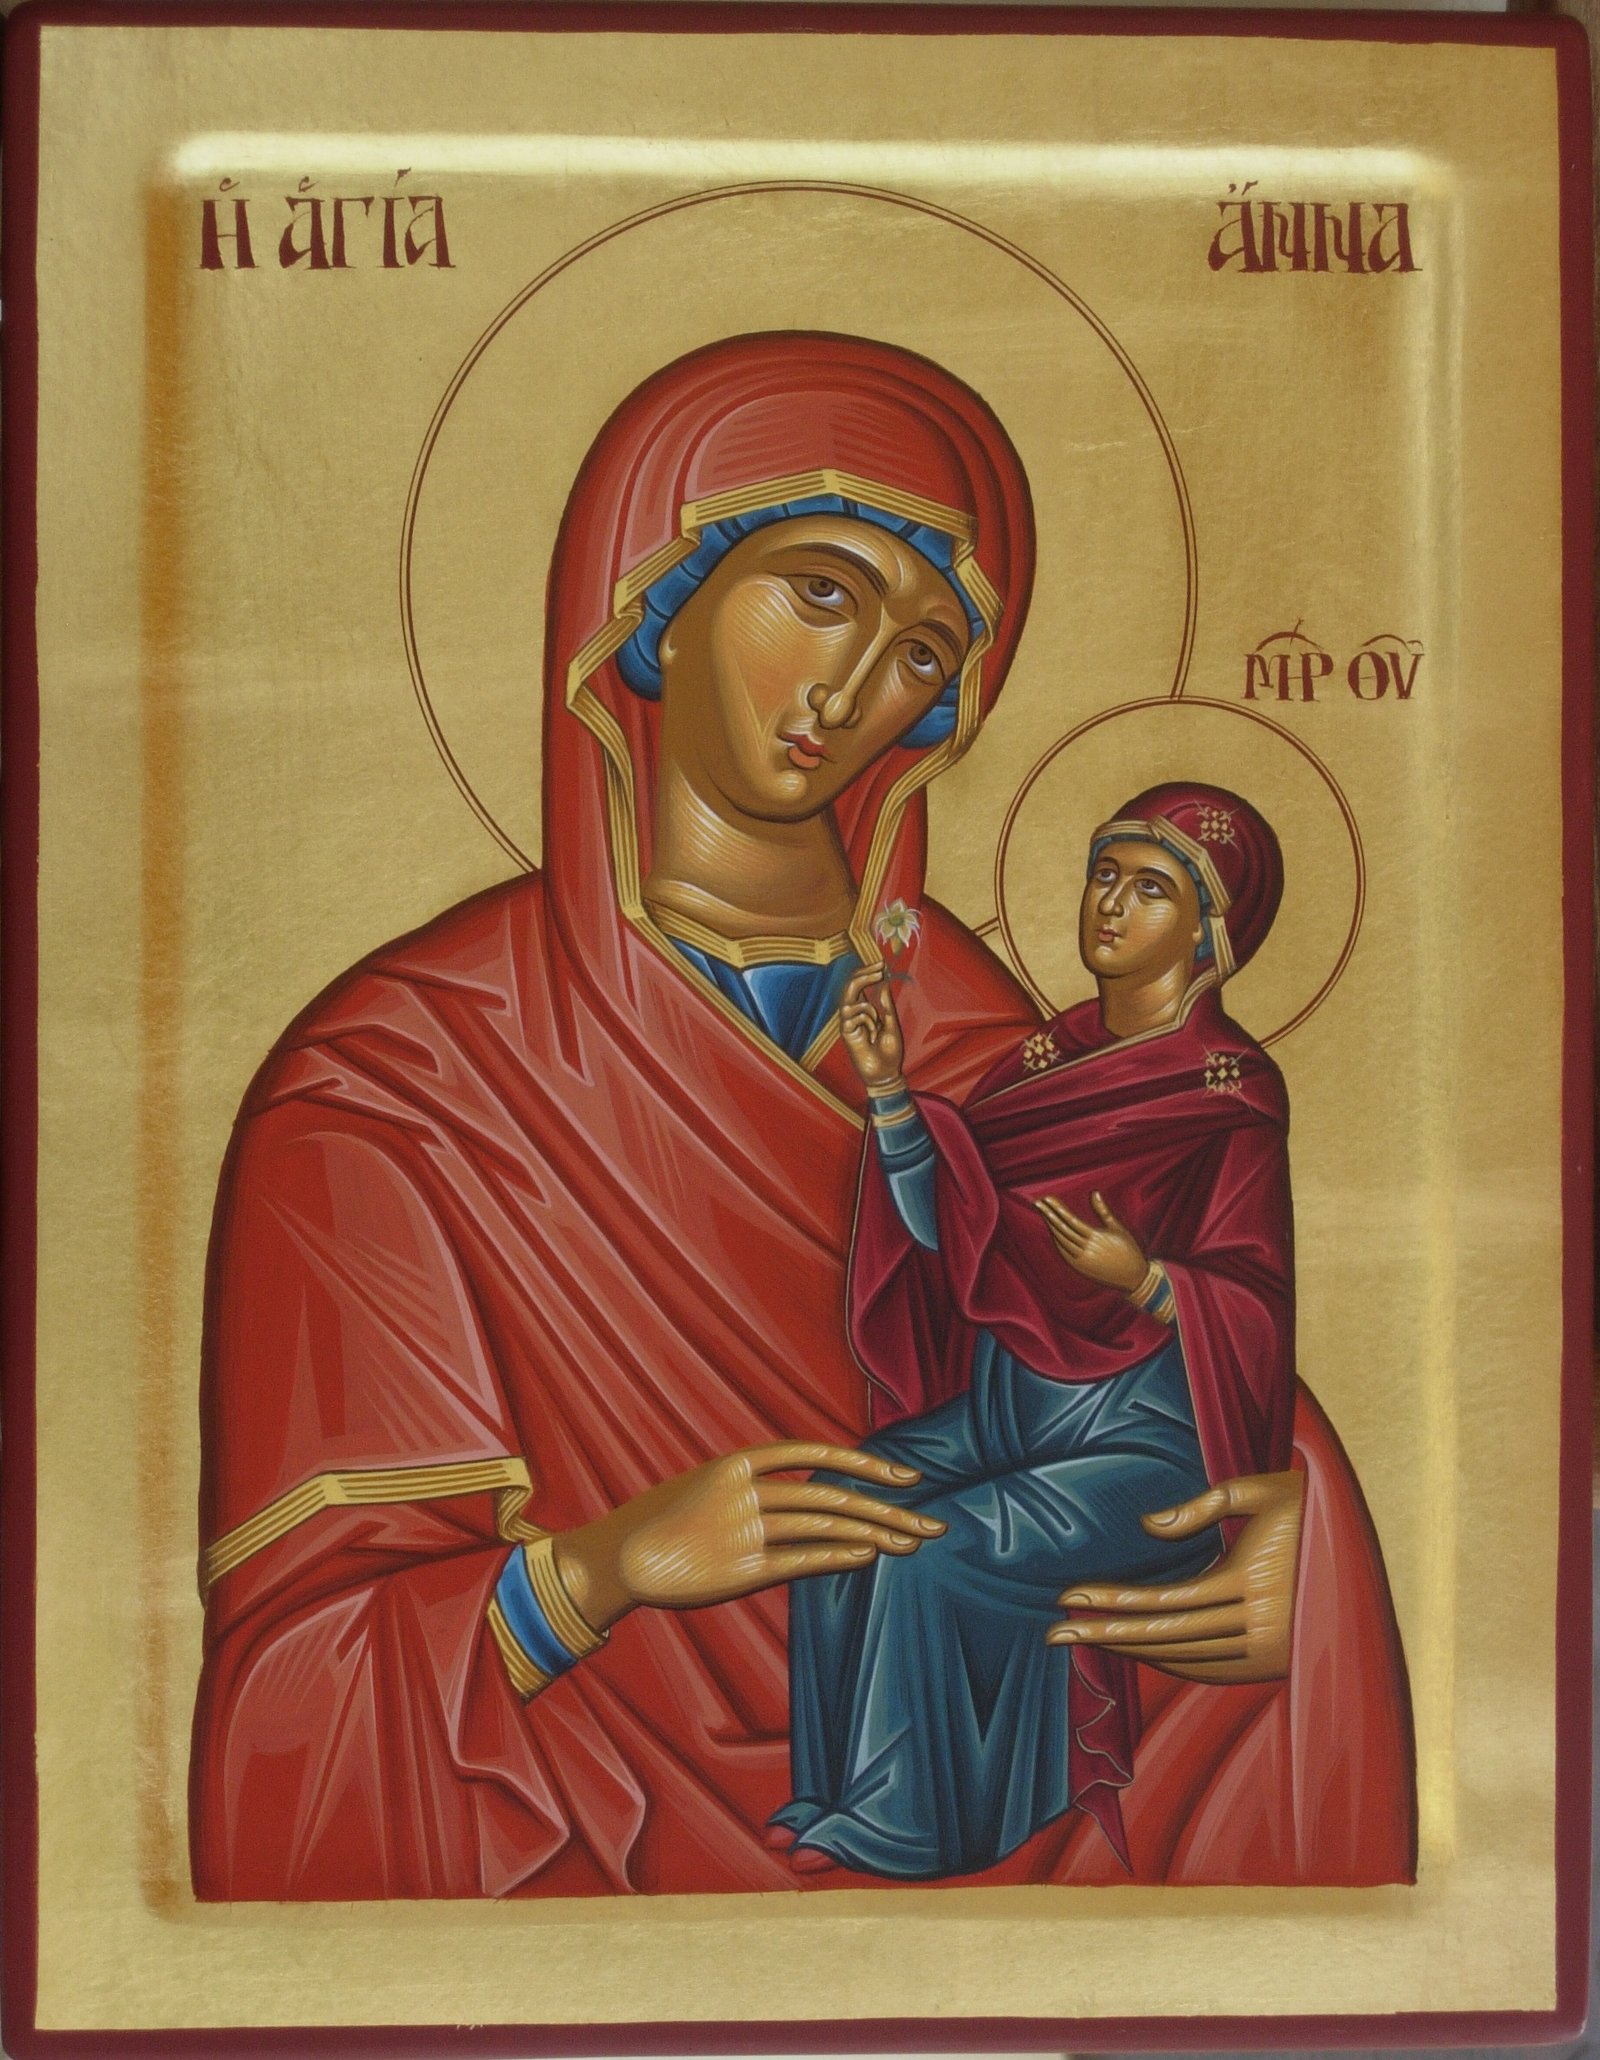 The conception of the Theotokos by St. Anna